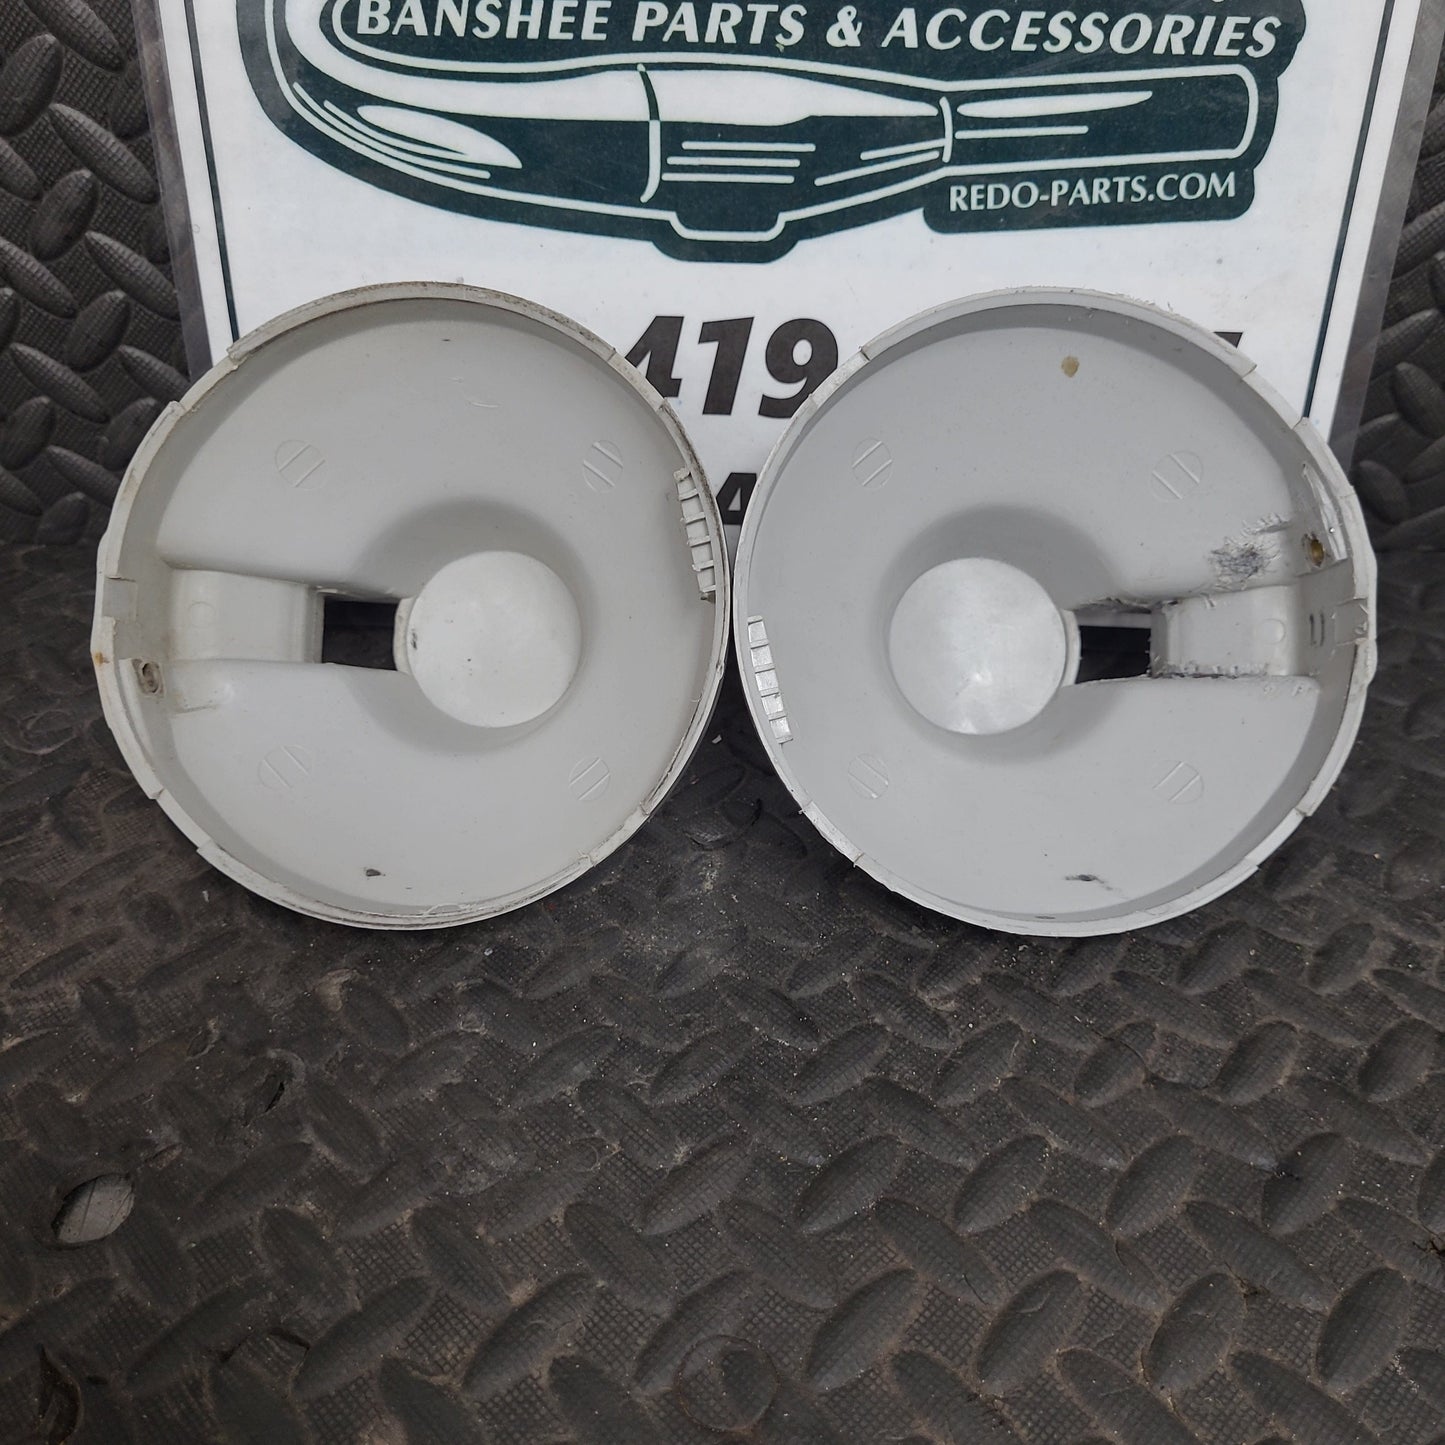 OEM Repaired Gray Headlight Housings From 1991 *USED*